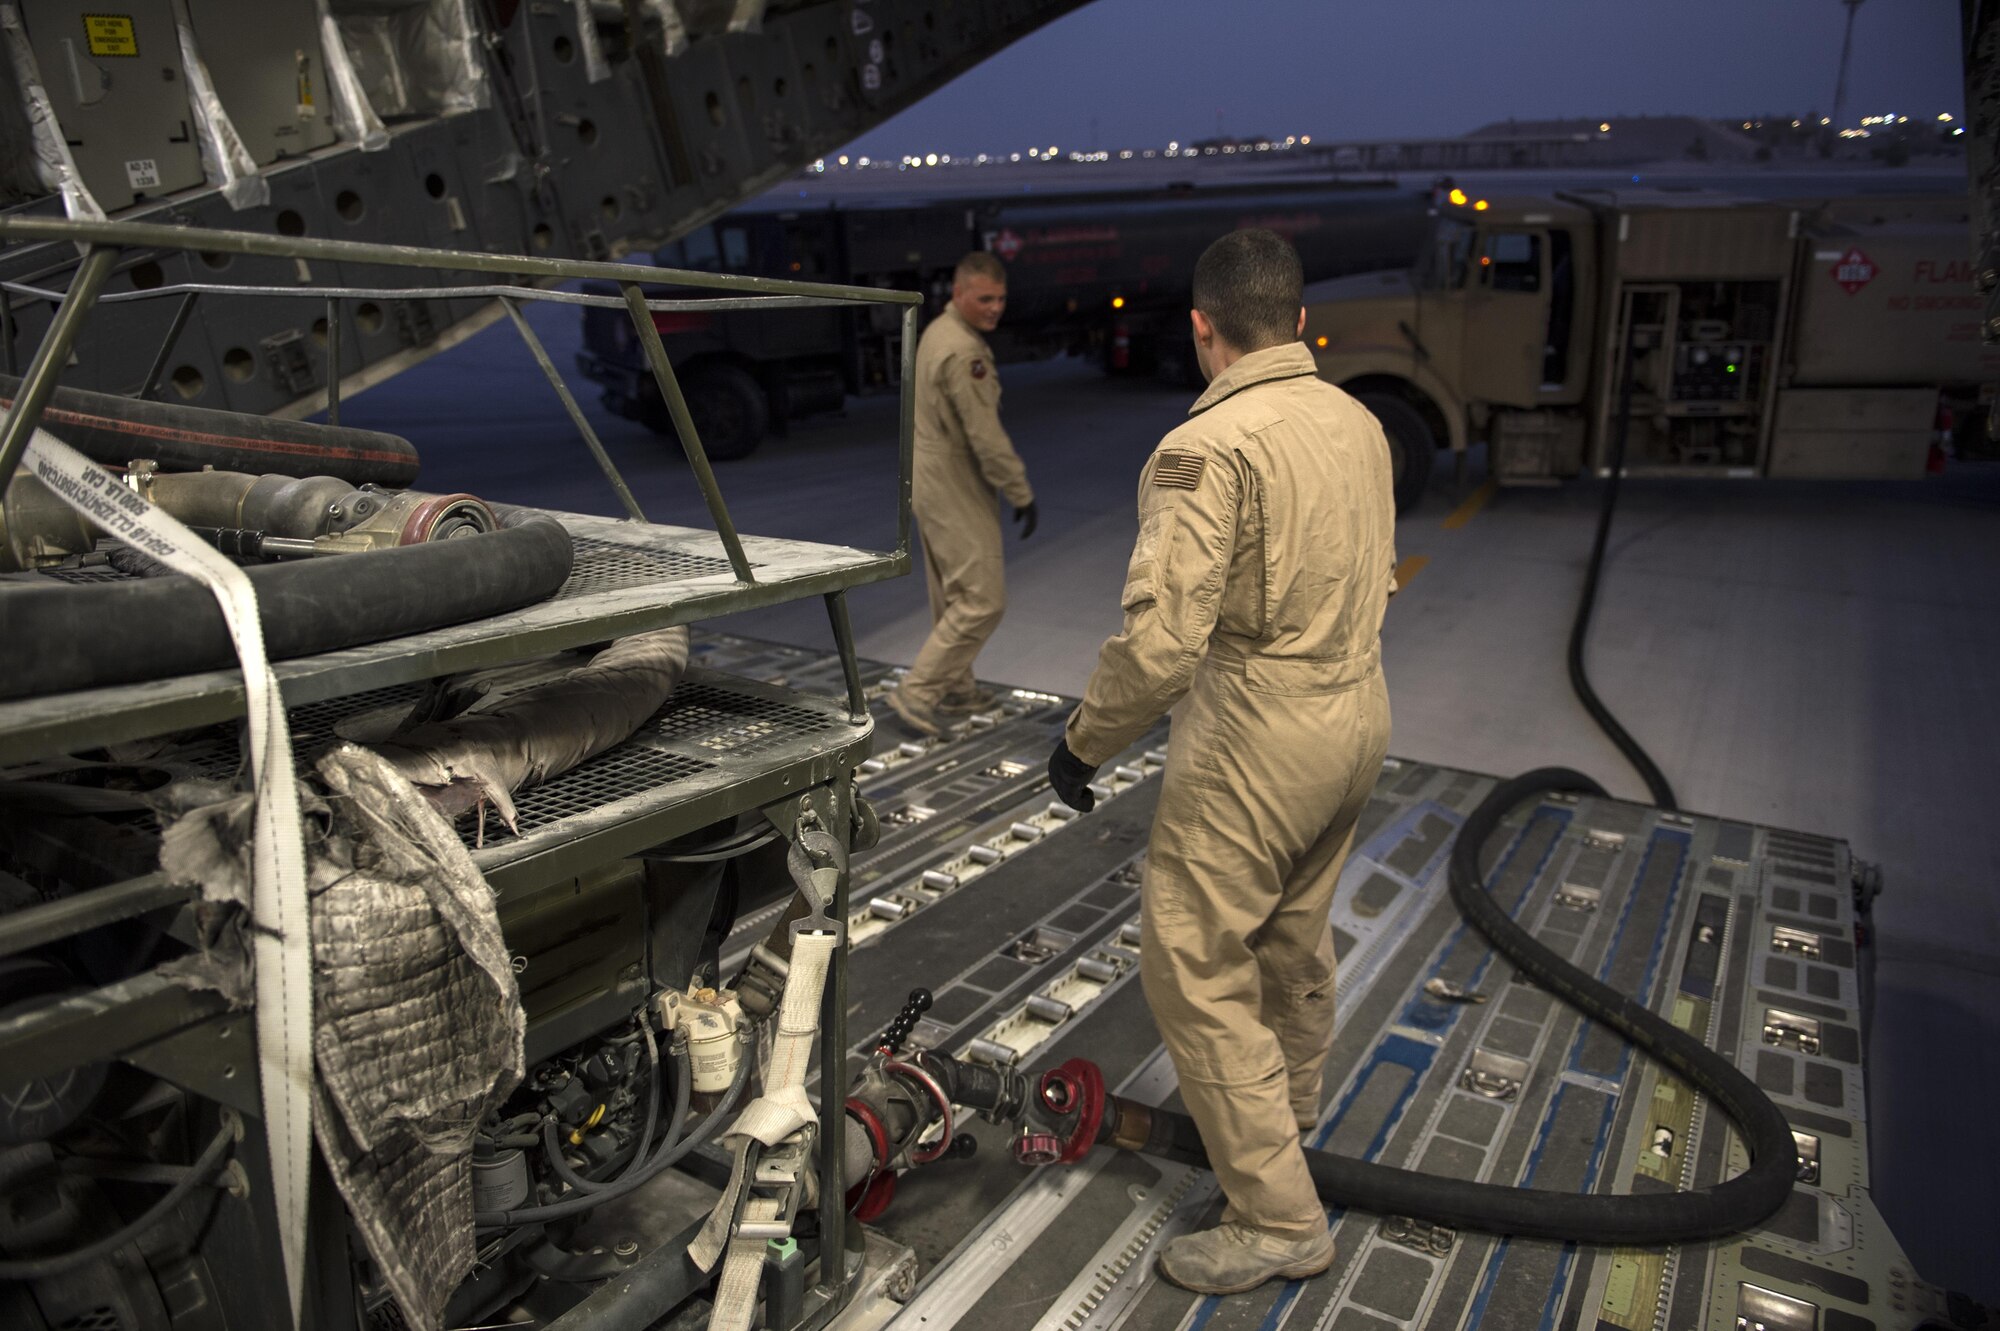 U.S. Air Force Senior Airmen Dalton Lobato, right, and Benjamin Hunter, 379th Expeditionary Logistics Readiness Squadron aerial bulk fuels delivery system team members, fill fuel bladders for transport to coalition bases at Iraq in support of Operation Inherent Resolve, Dec. 16, 2015. OIR is the coalition intervention against the Islamic State of Iraq and the Levant. (U.S. Air Force photo by Tech. Sgt. Nathan Lipscomb)